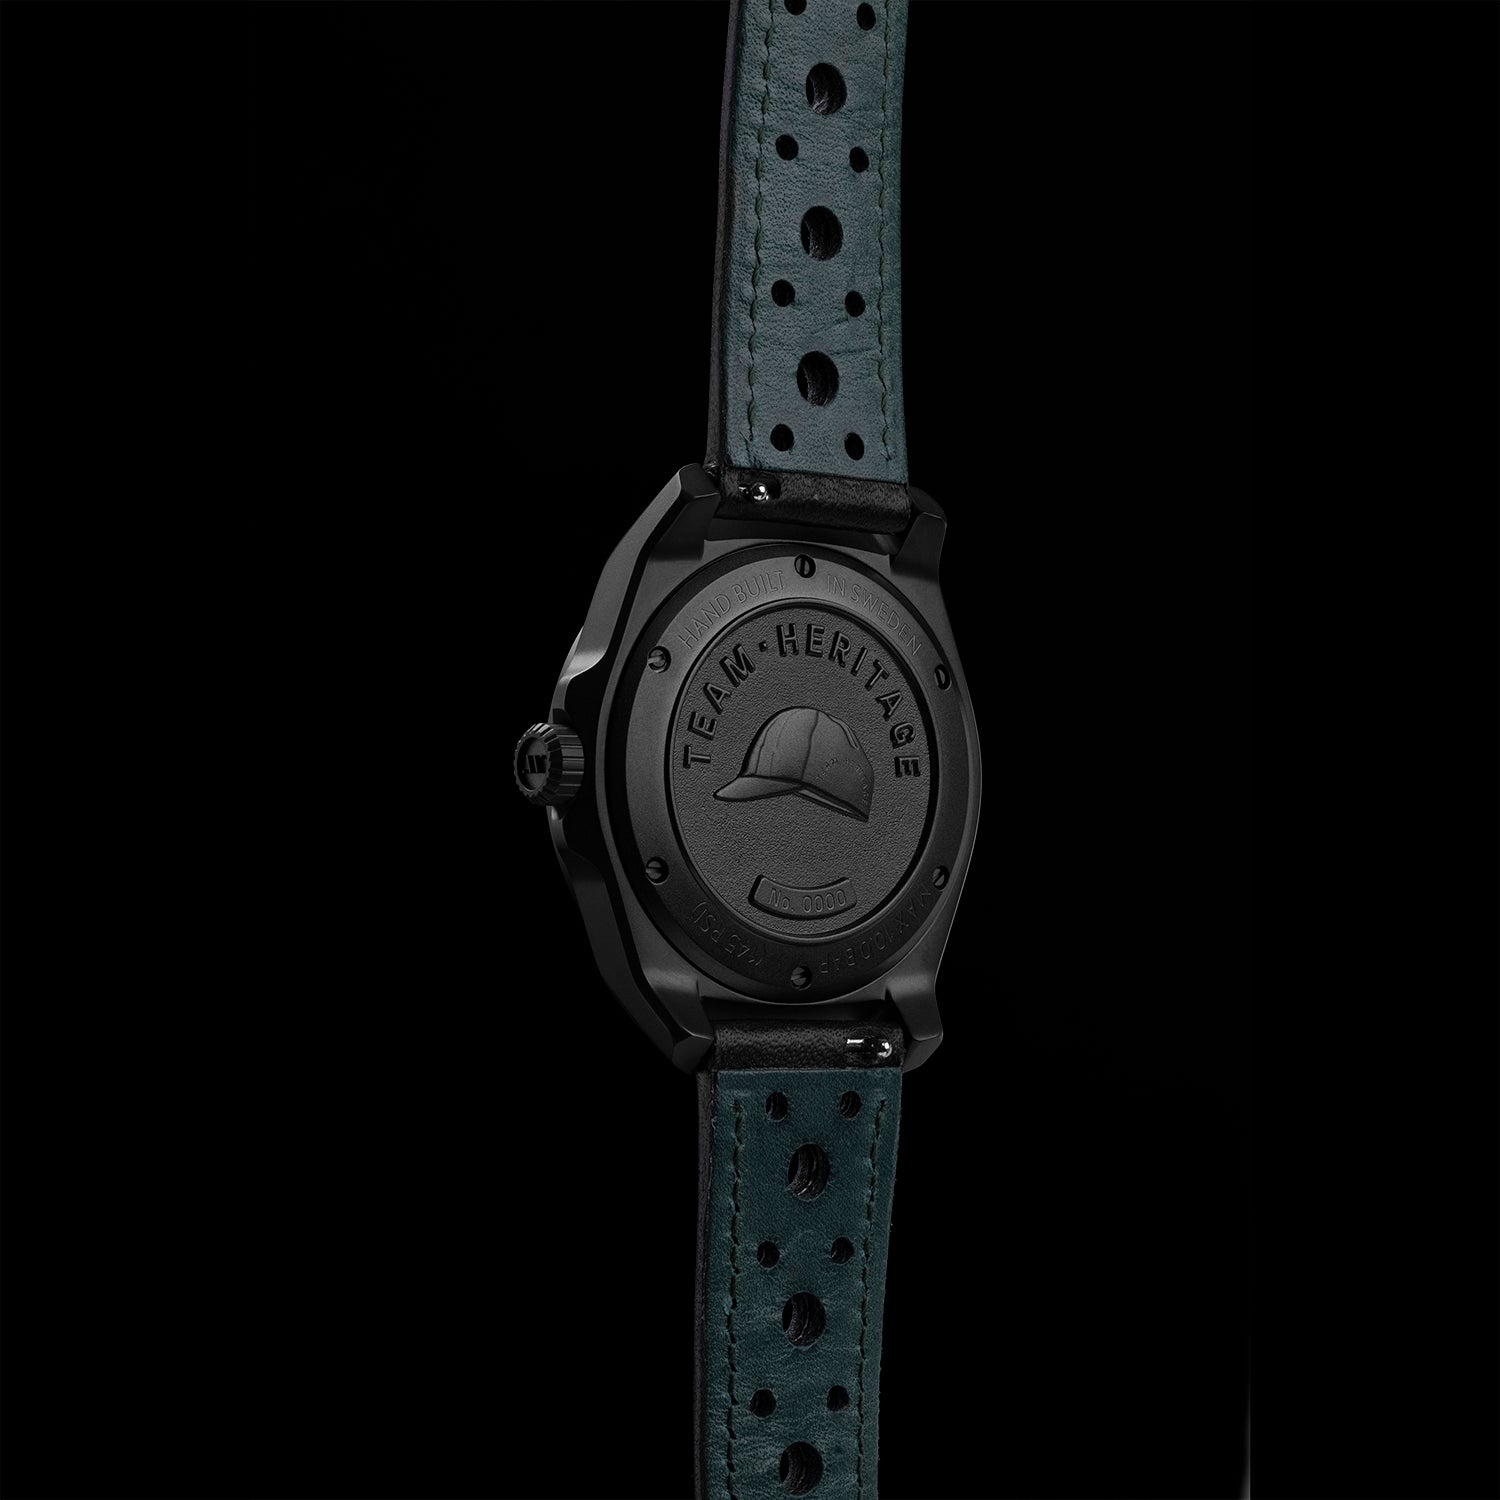 Perforated black leather strap